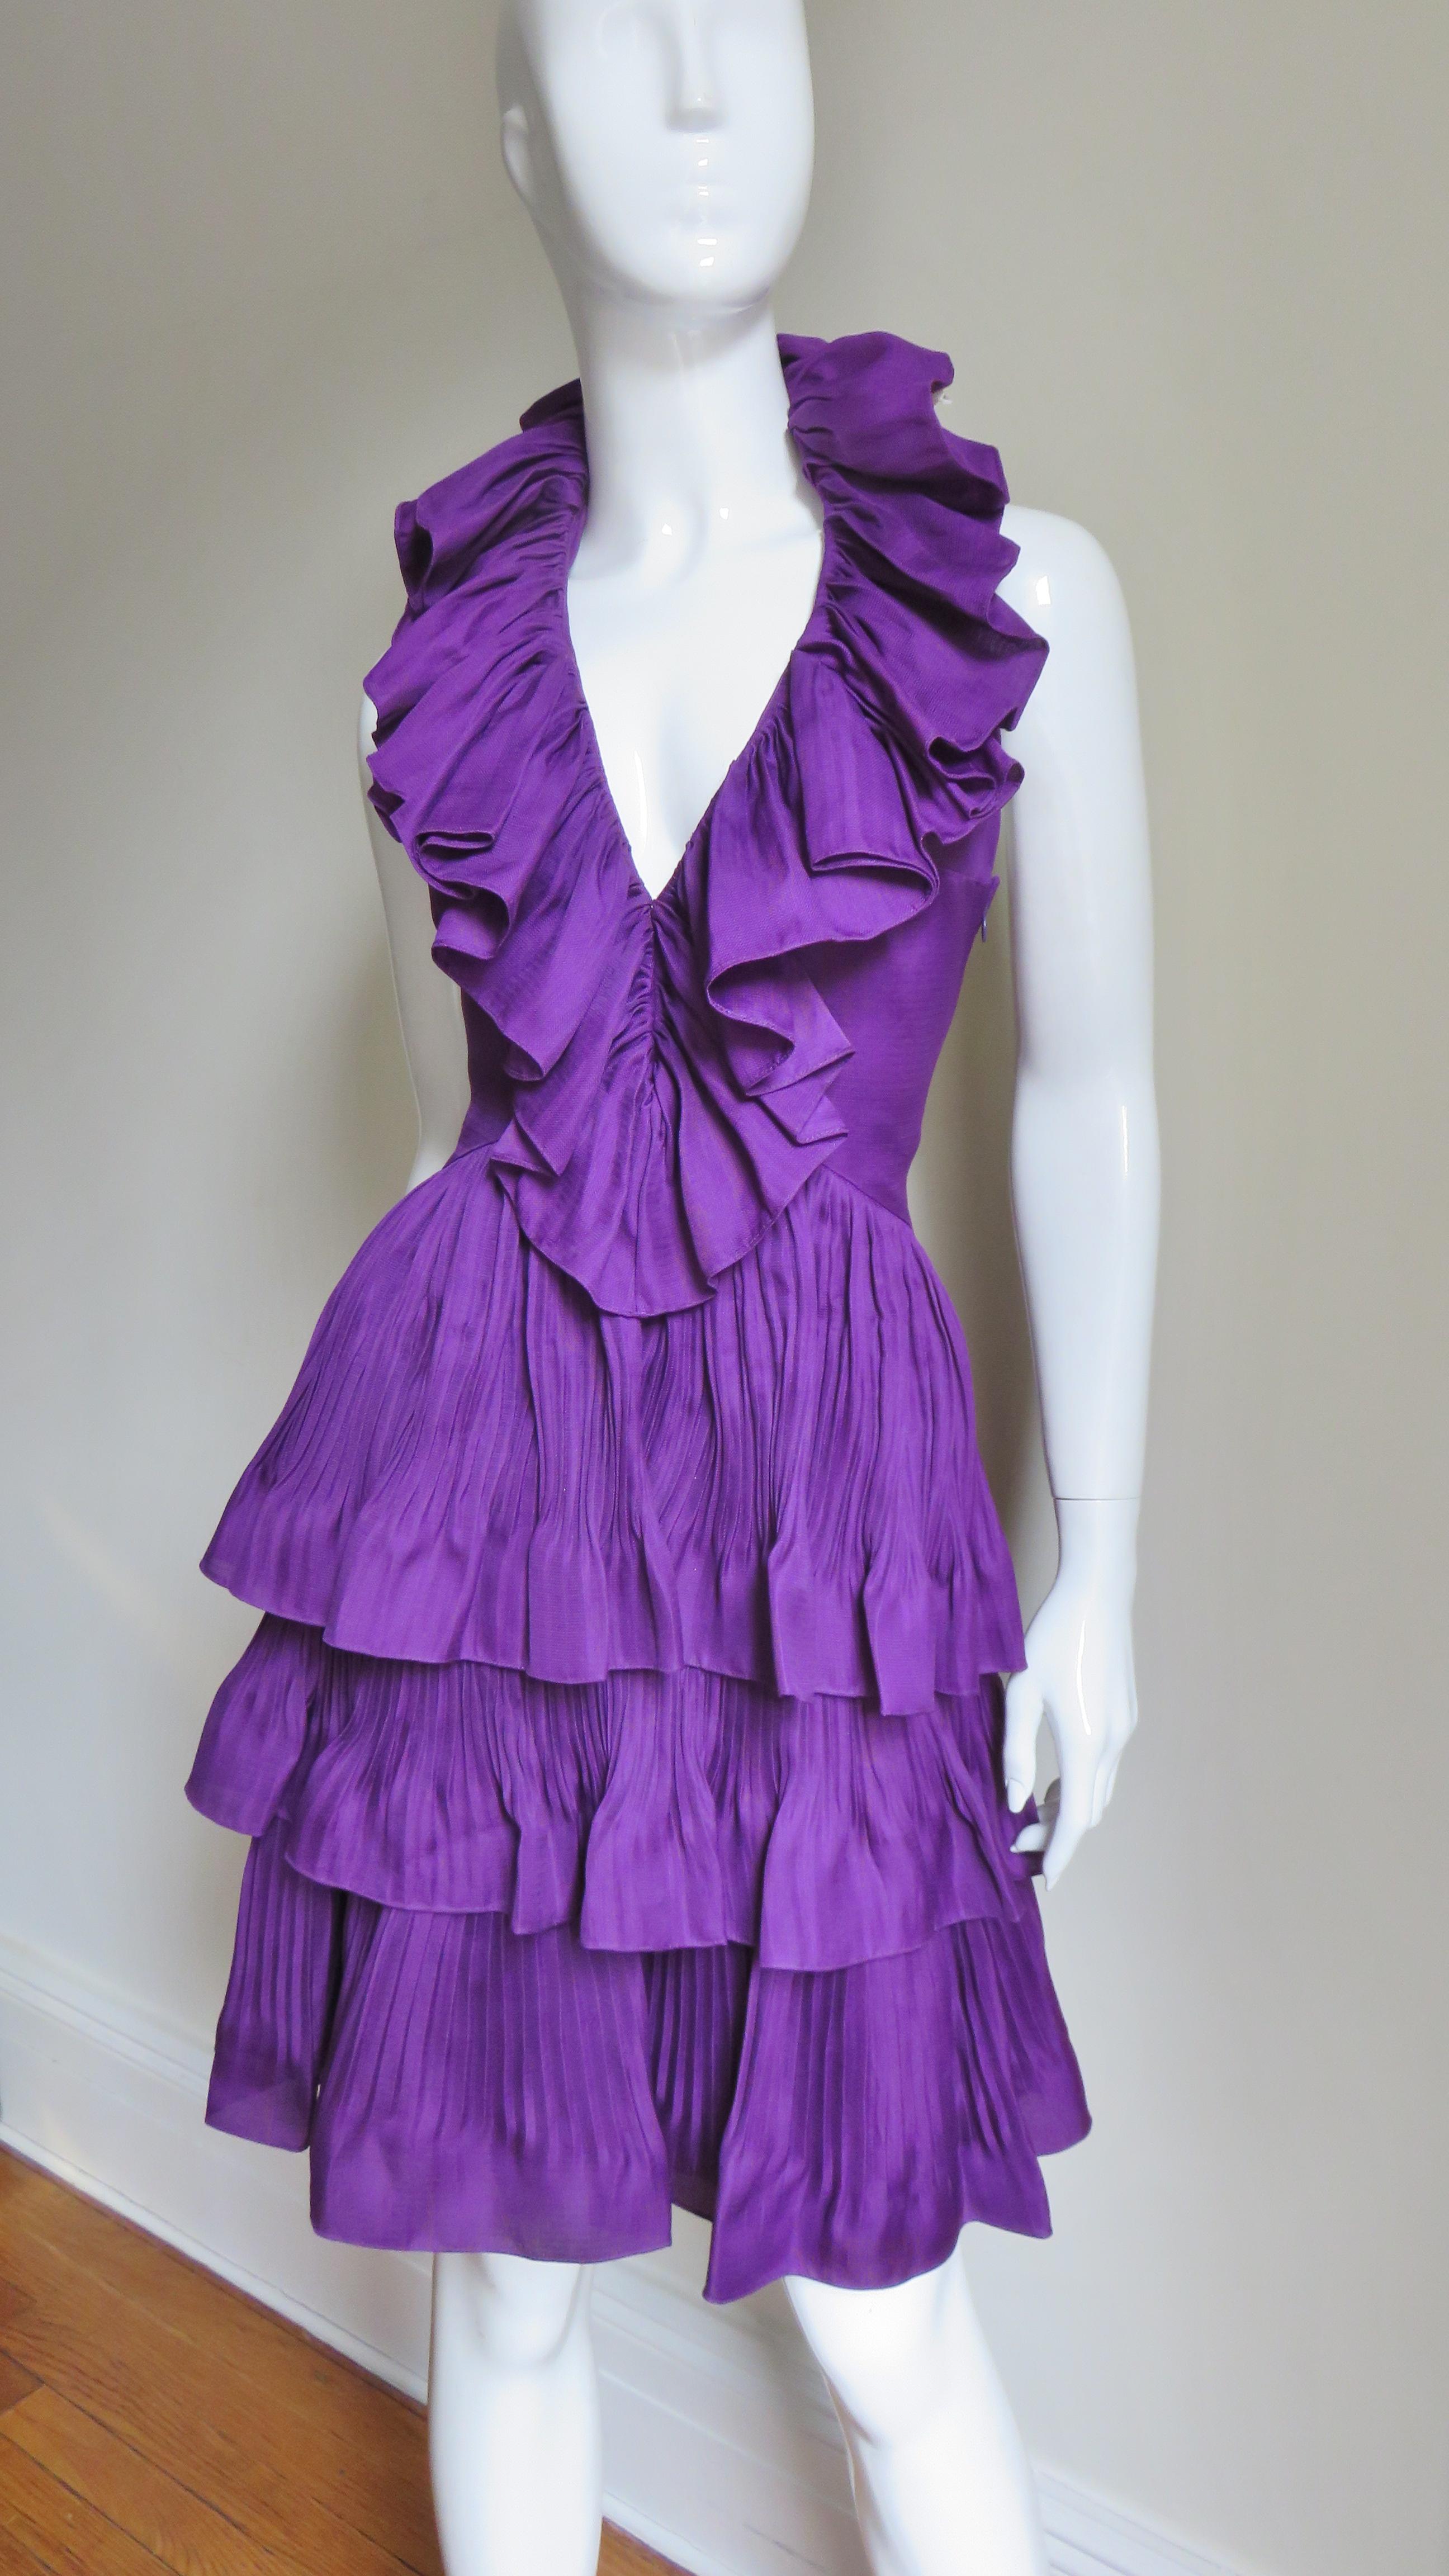 A gorgeous rich purple silk halter dress by John Galliano for Christian Dior. It is fitted through the bodice with a stunning intricately detailed ruffle trimmed plunge halter neckline.  The skirt is comprised of 3 gathered overlapping tiers. It is